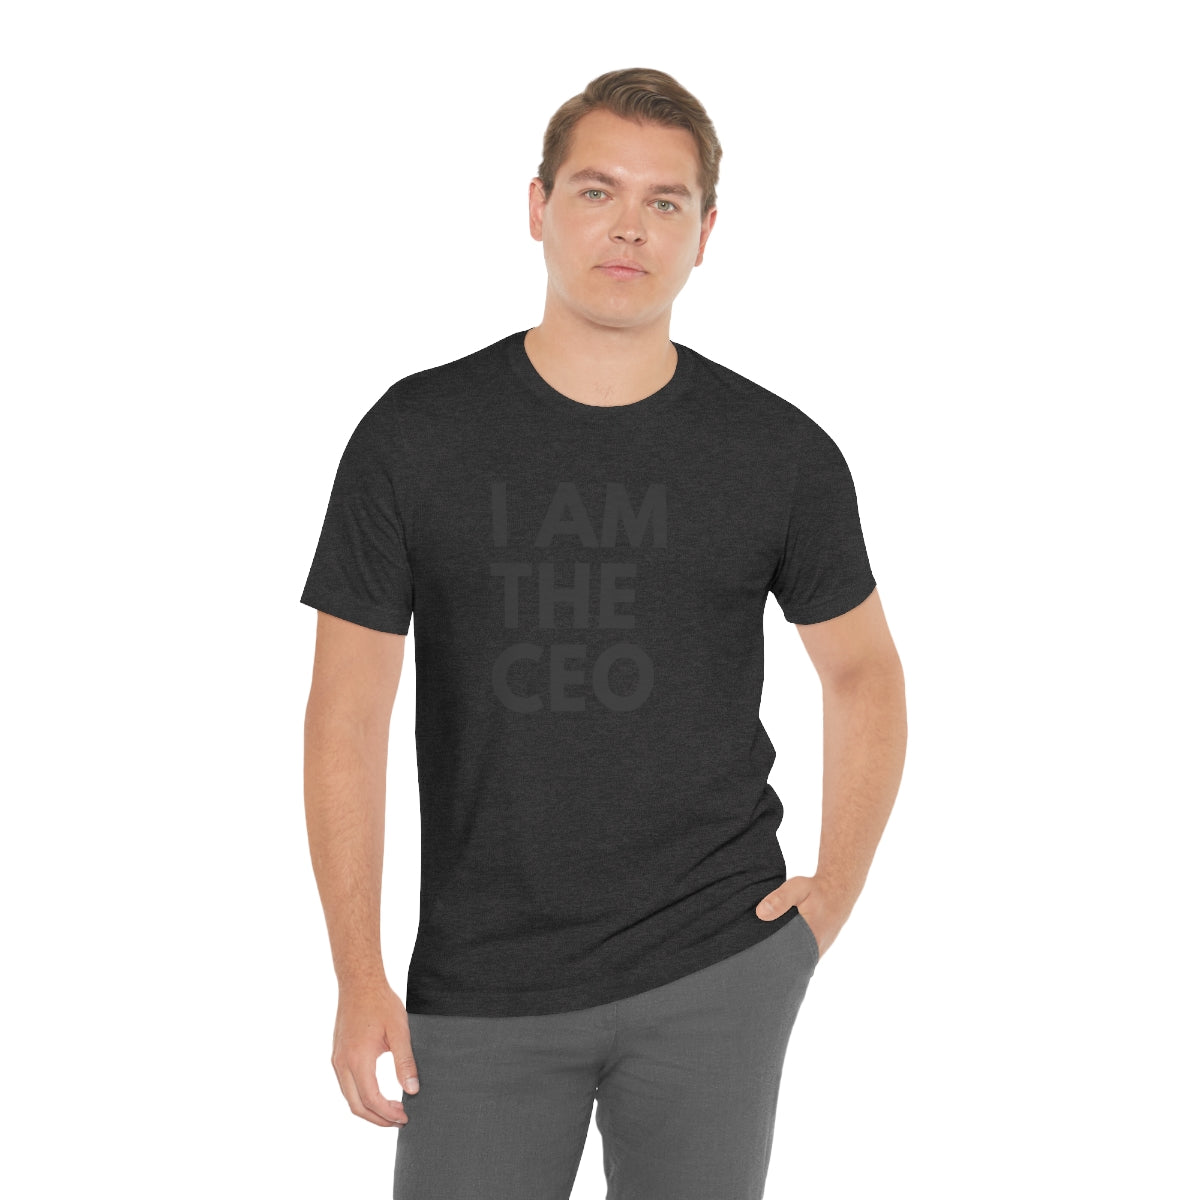 I AM THE CEO Type Tee | Inspiration Tee | Entrepreneur | Business Owner | Motivation | Unisex Jersey Short Sleeve